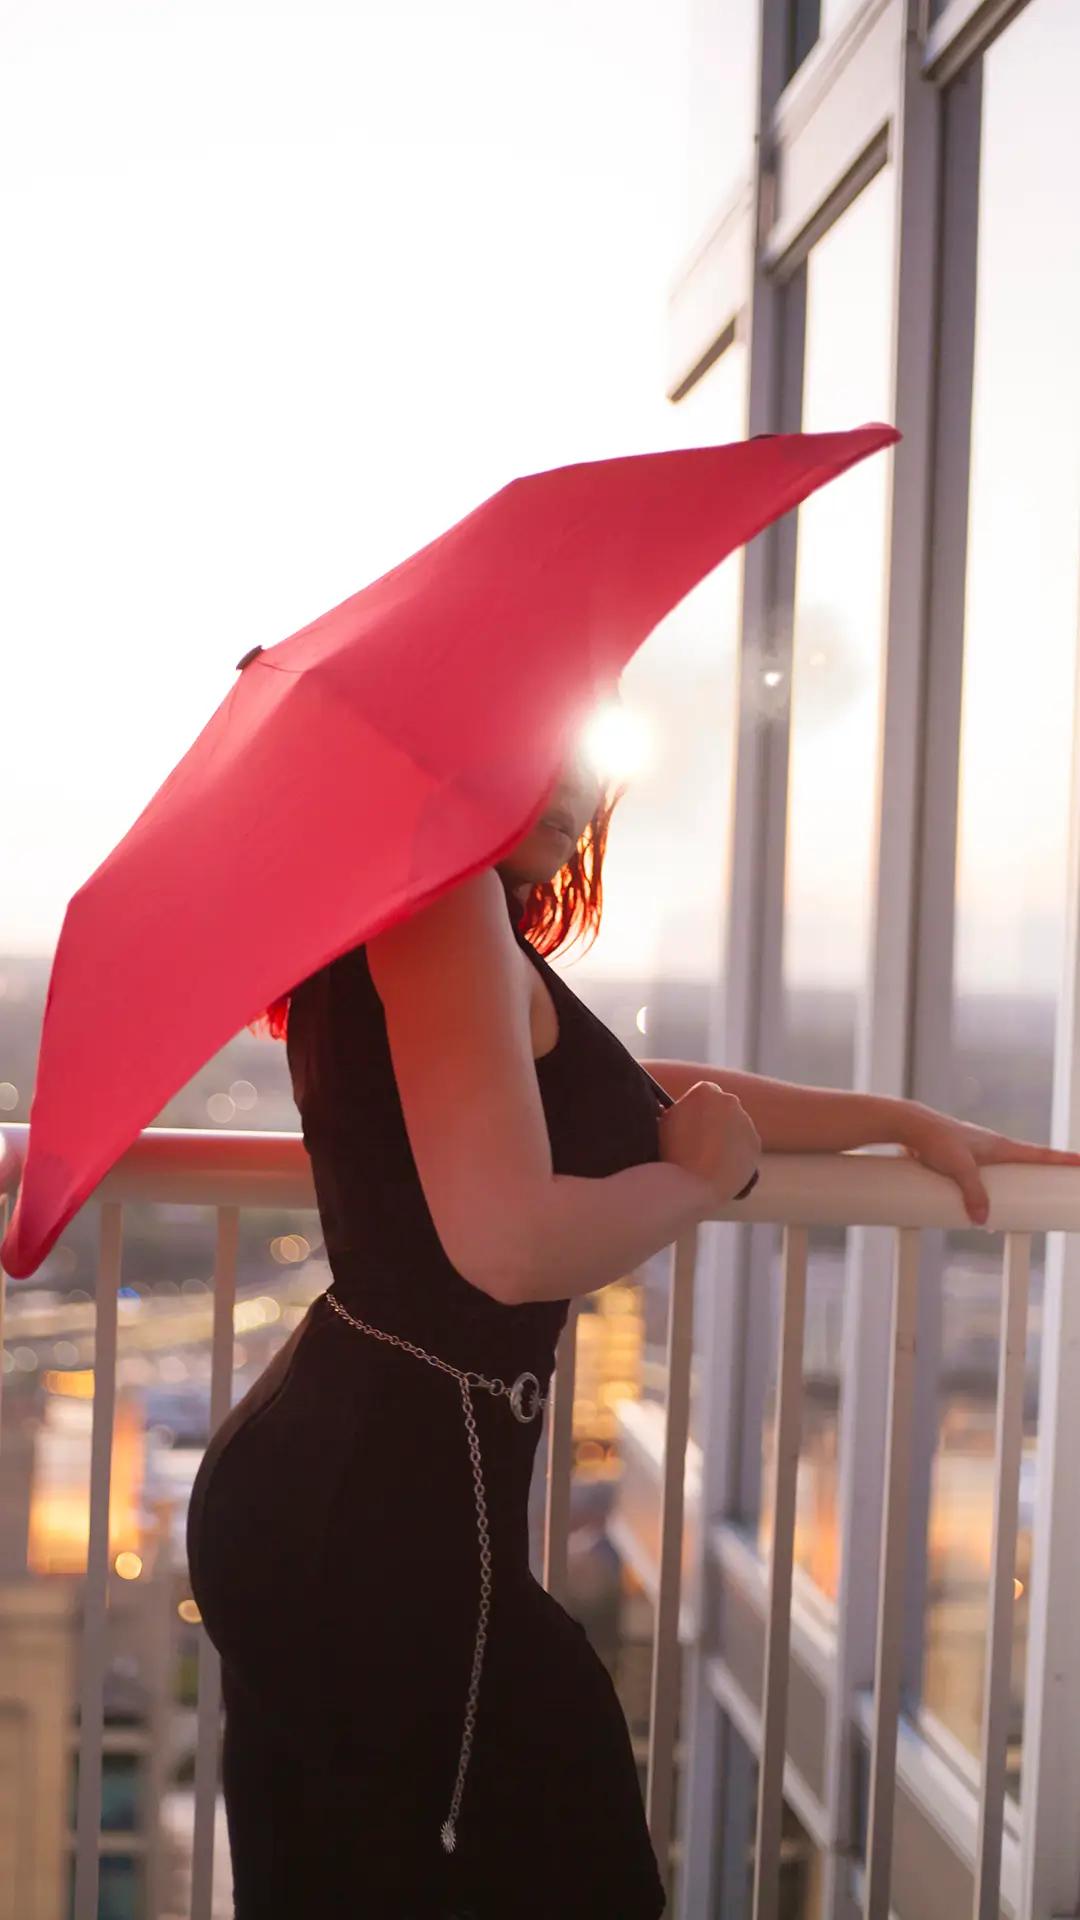 Mel Mariposa in profile wearing a little black dress and peeking out from under a red umbrella